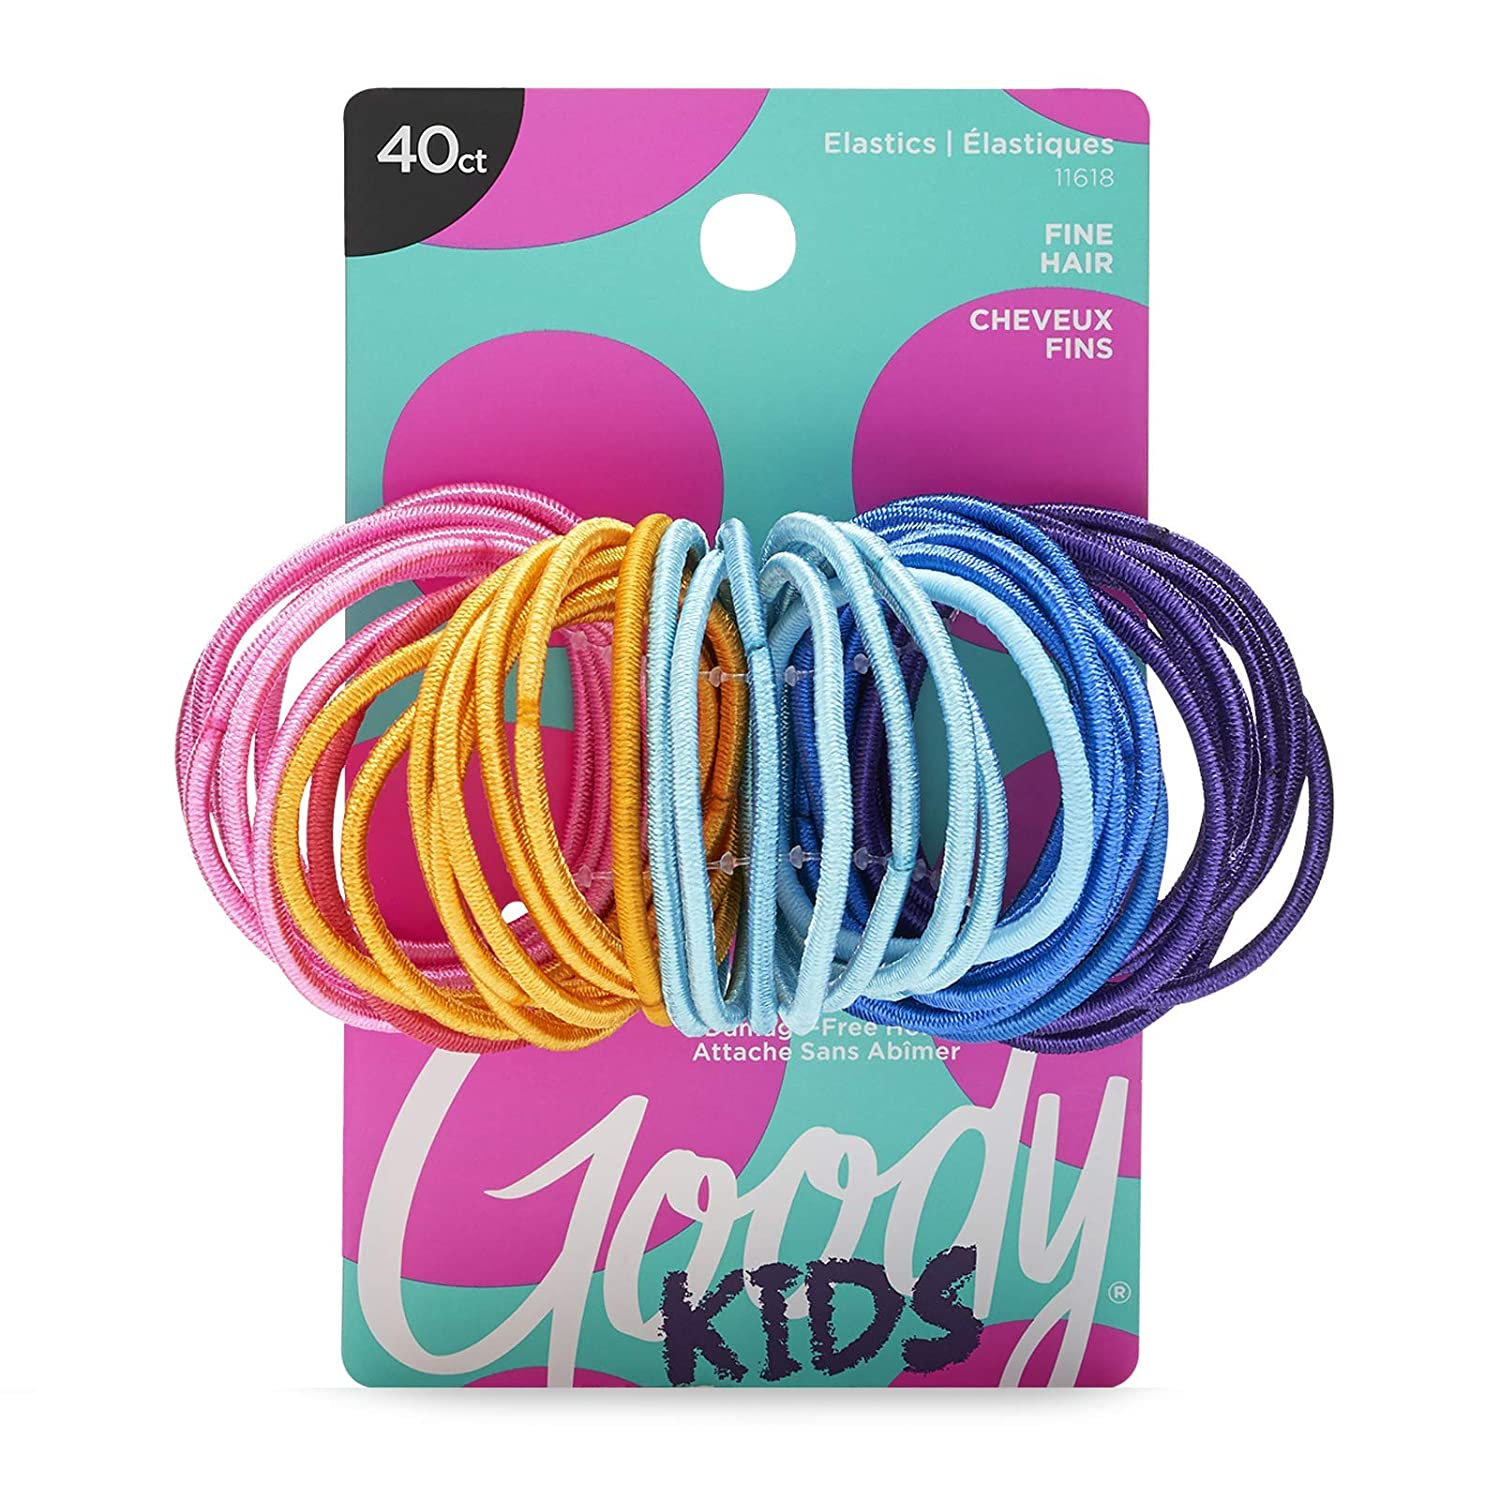 Goody Ouchless Elastic Hair Ties - 60 Count, Assorted in Brights and Pastels - Perfect for Fine, Curly Hair and Sensitive Scalps - Pain Free Hair Accessories for Men, Women, Girls and Boys